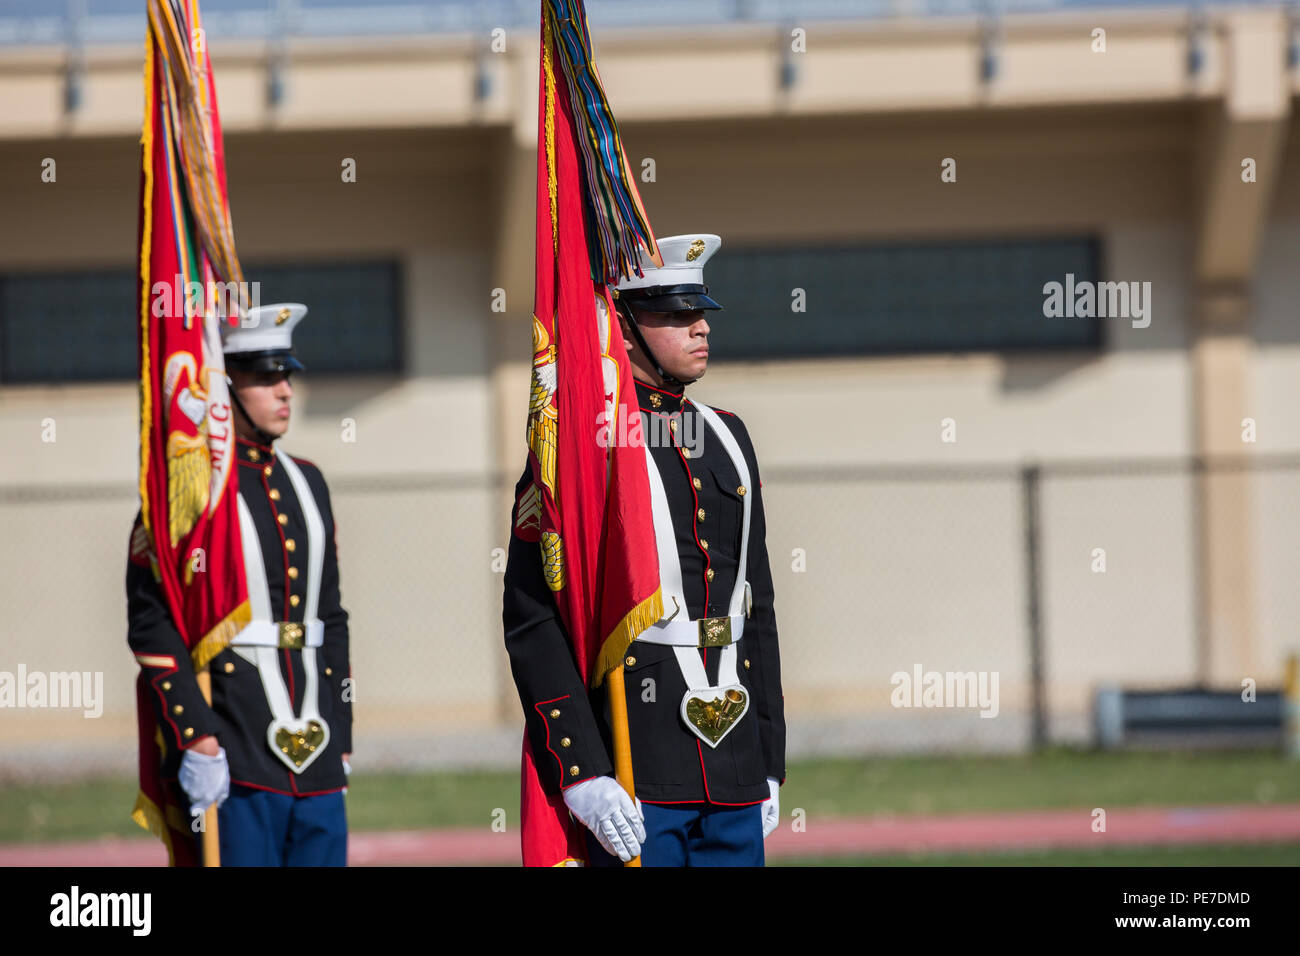 U.S. Marines stand at attention during the Joint Daytime Ceremony at Harry B. Liversedge field on Camp Lejeune, N.C., Nov. 6, 2015. The ceremony is held every year in honor of the Marine Corps birthday and includes a historical uniform pageant, rededication of national and U.S. Marine Corps Colors and the traditional birthday cake cutting. (U.S. Marine Corps photo by Ms. Kaitlin Regan, COMCAM, MCI-East, Camp Lejeune/ Released) Stock Photo